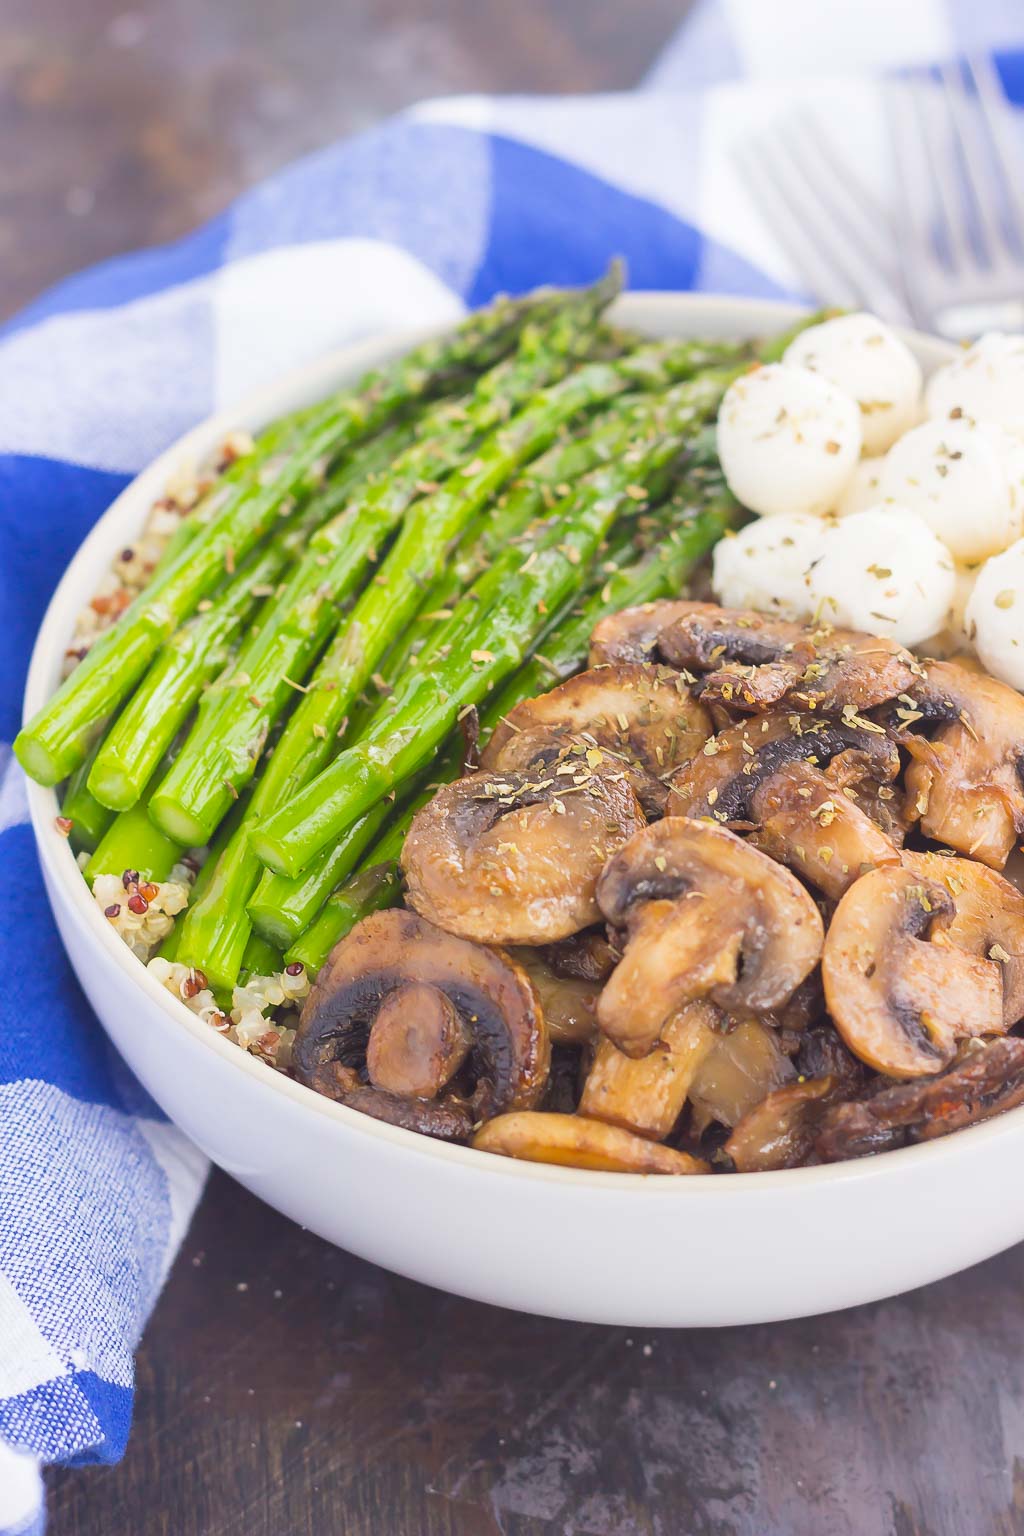 If you’re looking for a new favorite recipe, this Asparagus and Mushroom Quinoa Bowl will become a regular in your meal rotation. Hearty quinoa is tossed in a white balsamic dressing and then topped with roasted asparagus and fresh mushrooms. Fast, fresh and flavorful, this easy meal makes a delicious lunch or dinner!